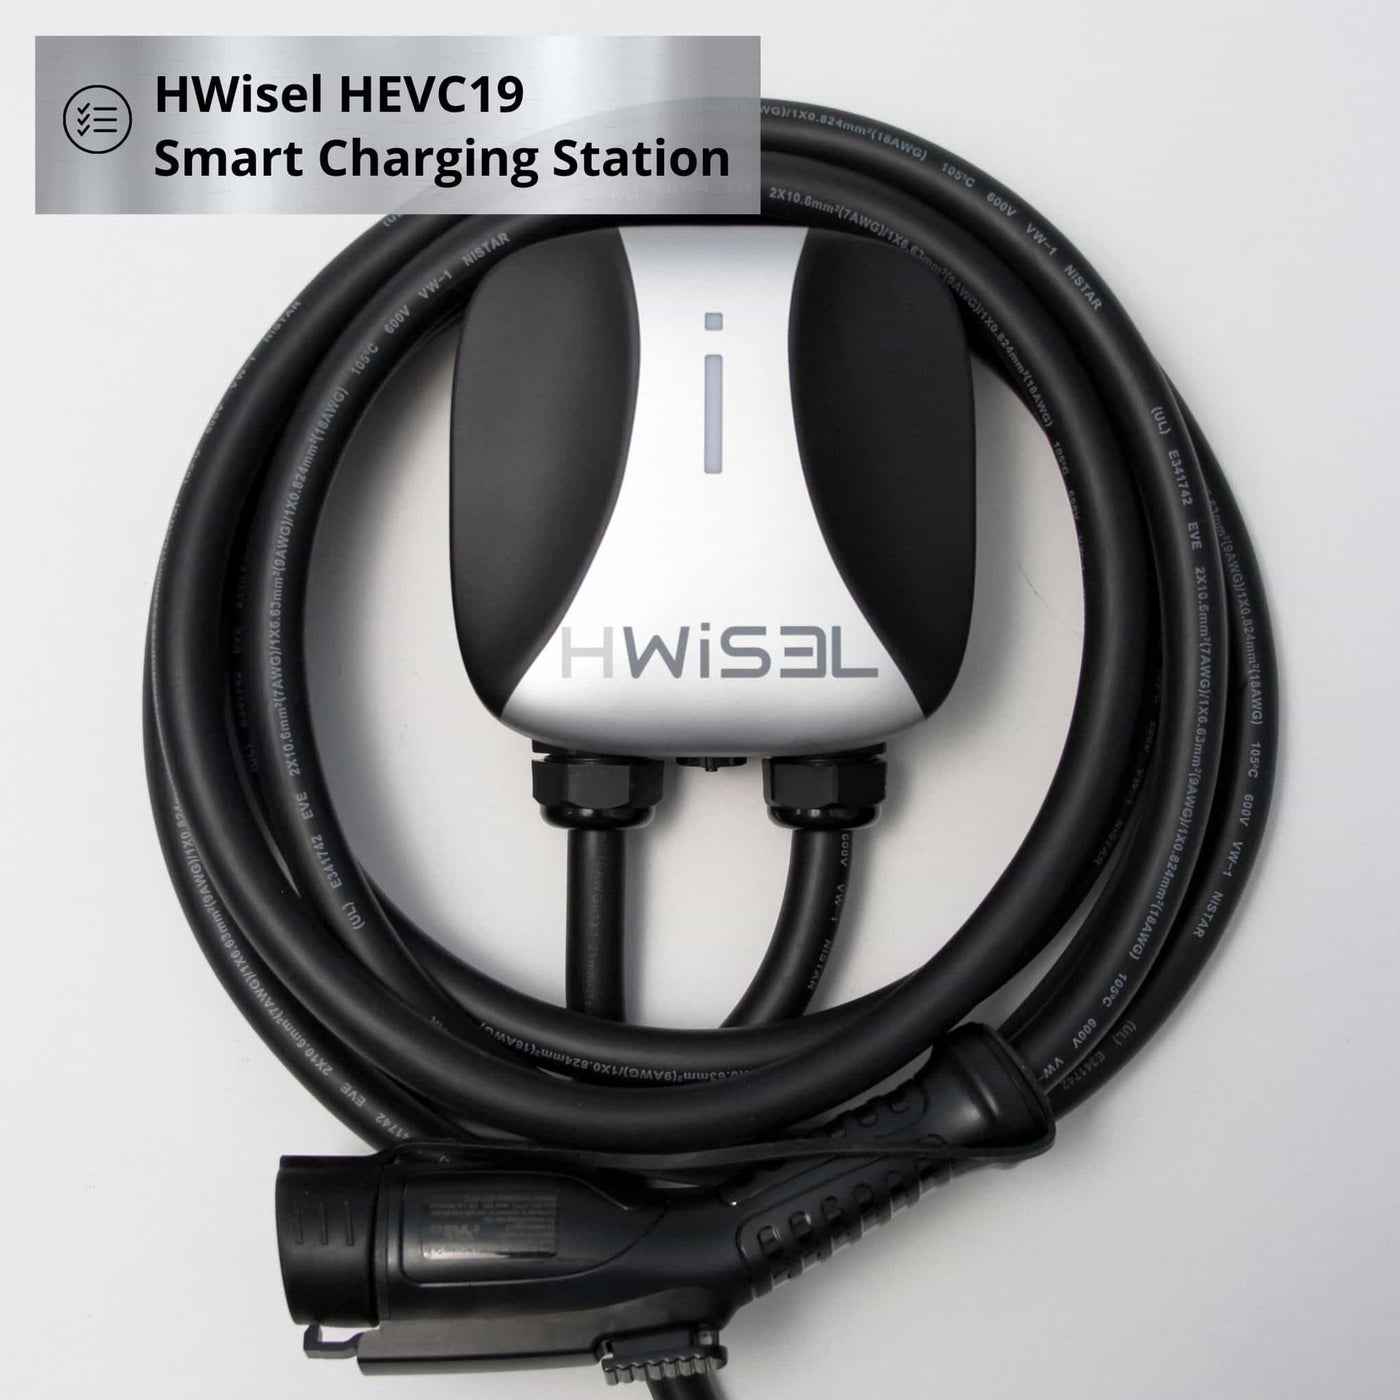 HWisel HEVC19 Smart Charging Station with Charger Vip Plan Image Size 2040x2040